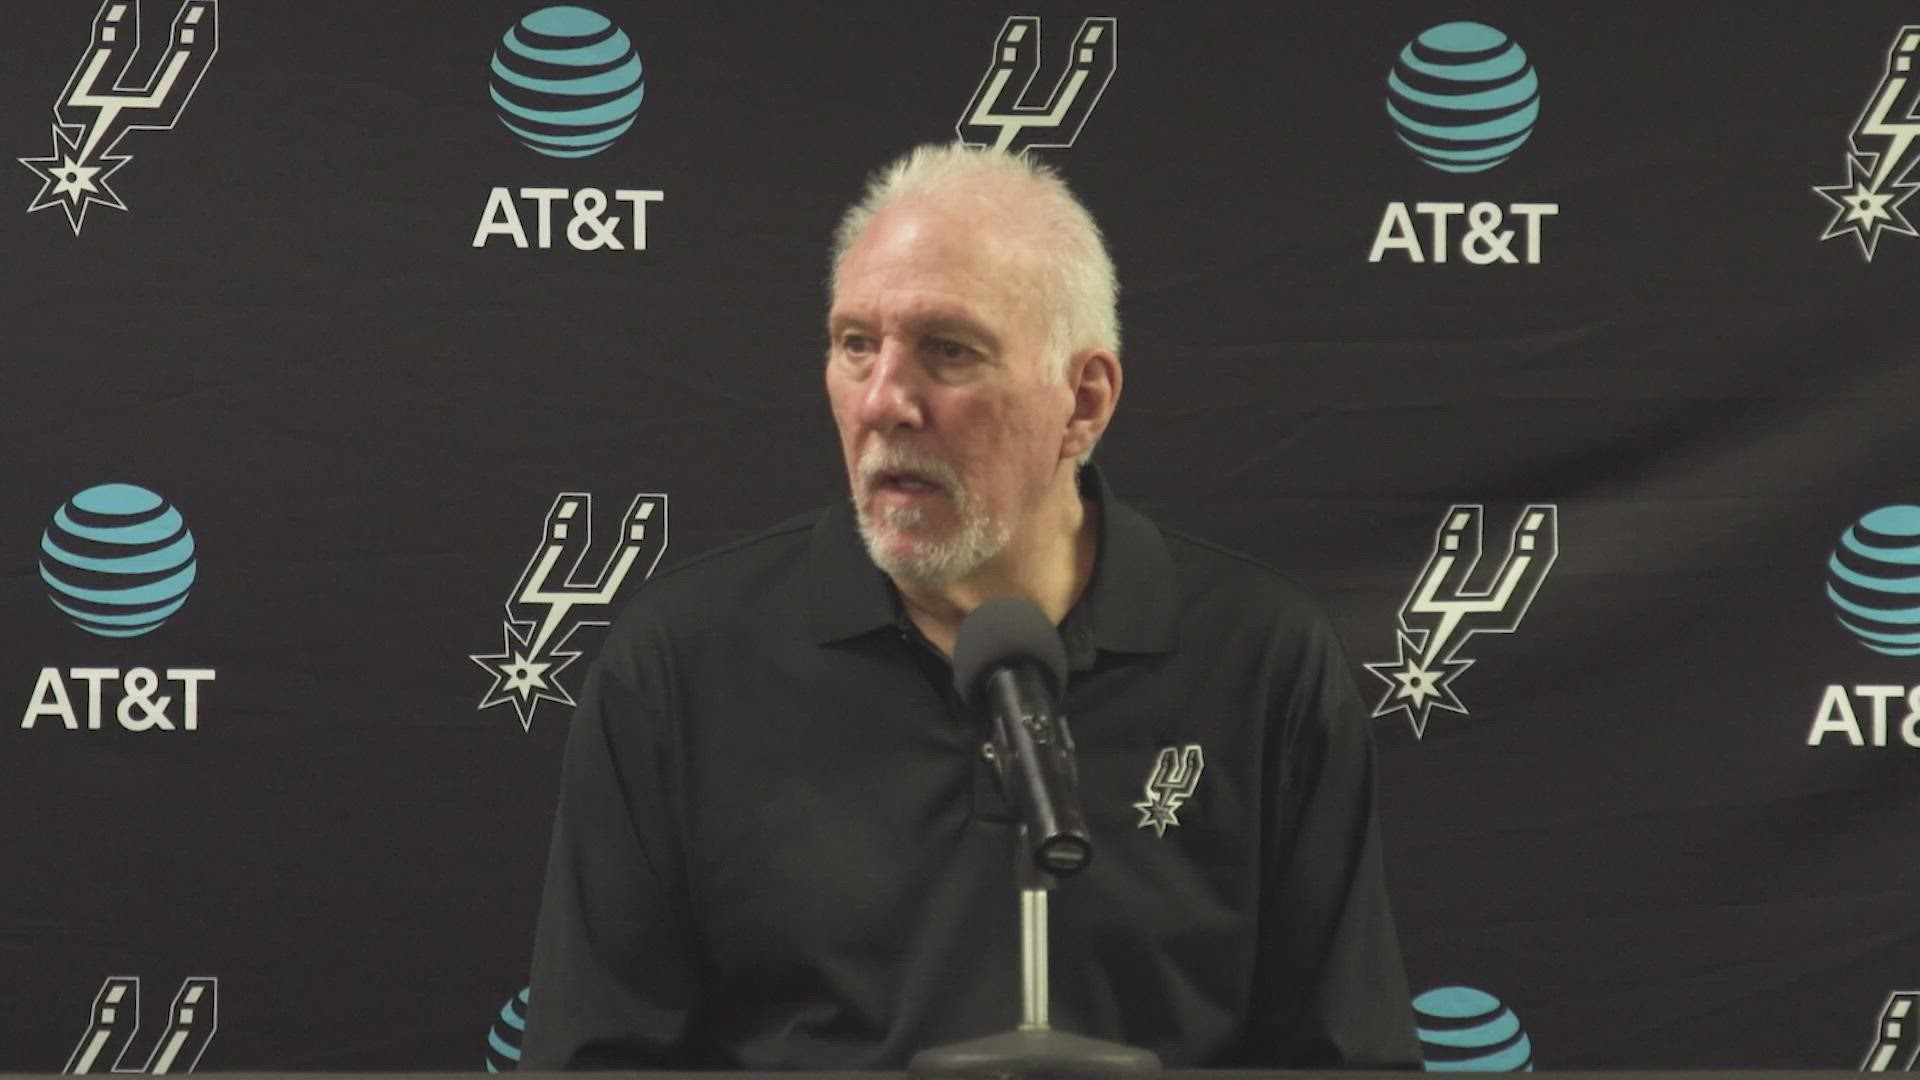 "There's a coupe of teams that have quite a few people in the protocol, and Detroit's one of em, so you don't know where it's gonna go," Popovich said.